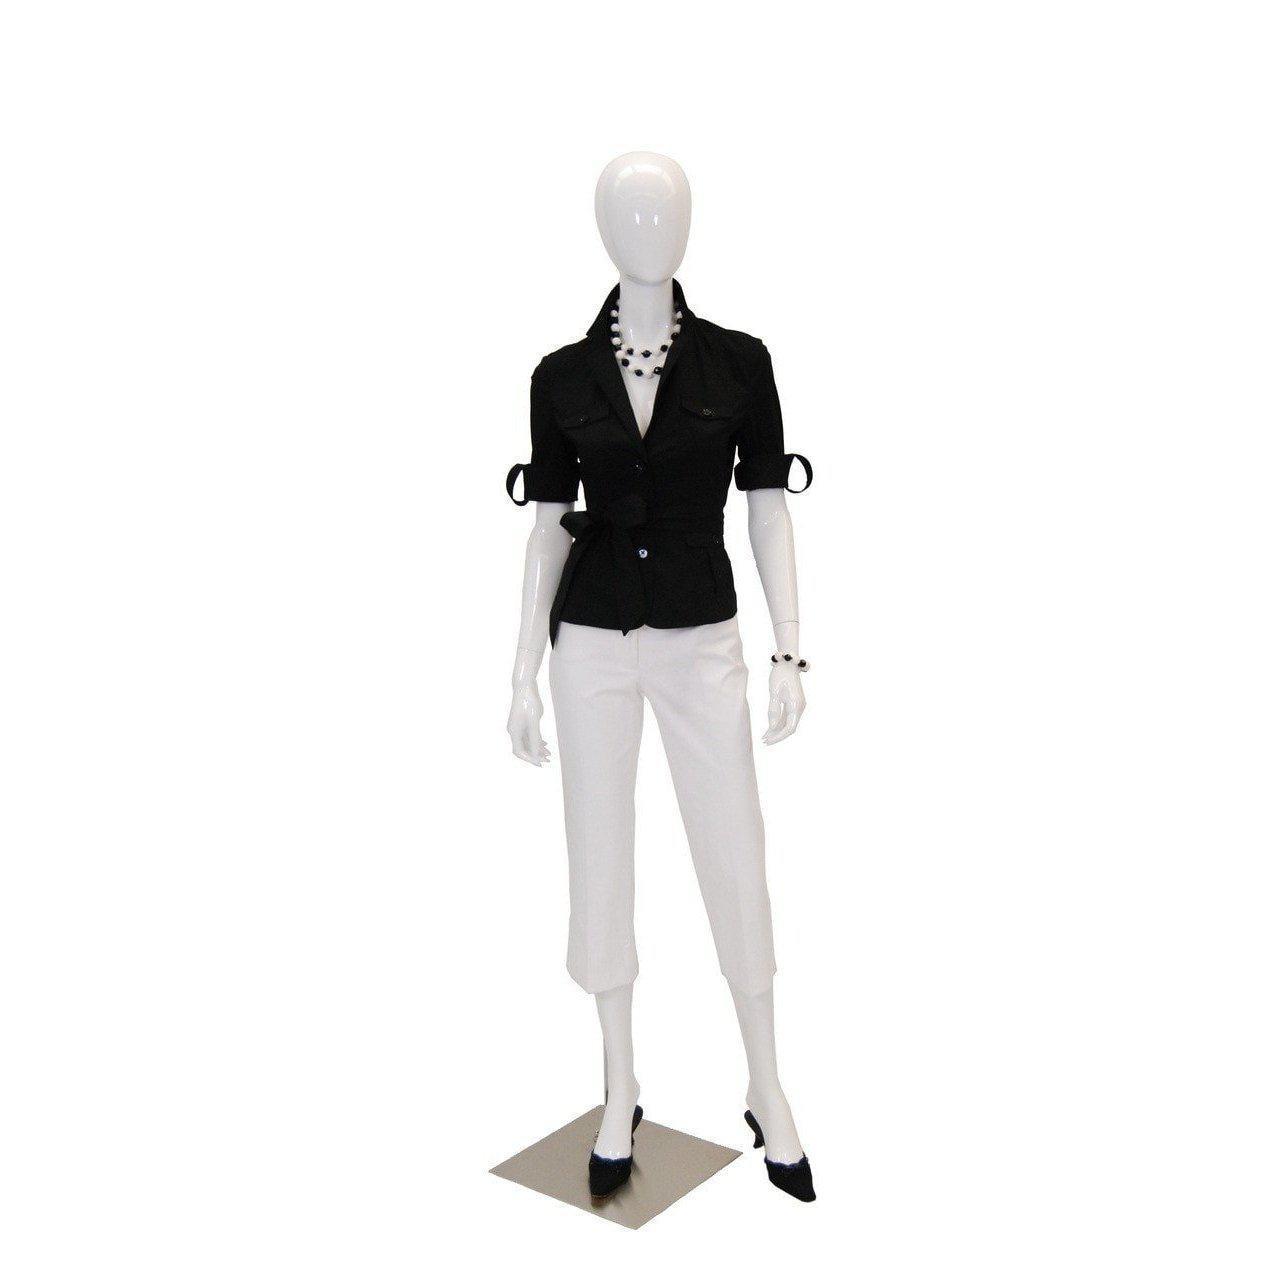 Fashionable Skin Color Full Body Female Mannequins Full Body Mannequin Best  Quality Hot Sale From Mannequin1688, $93.03